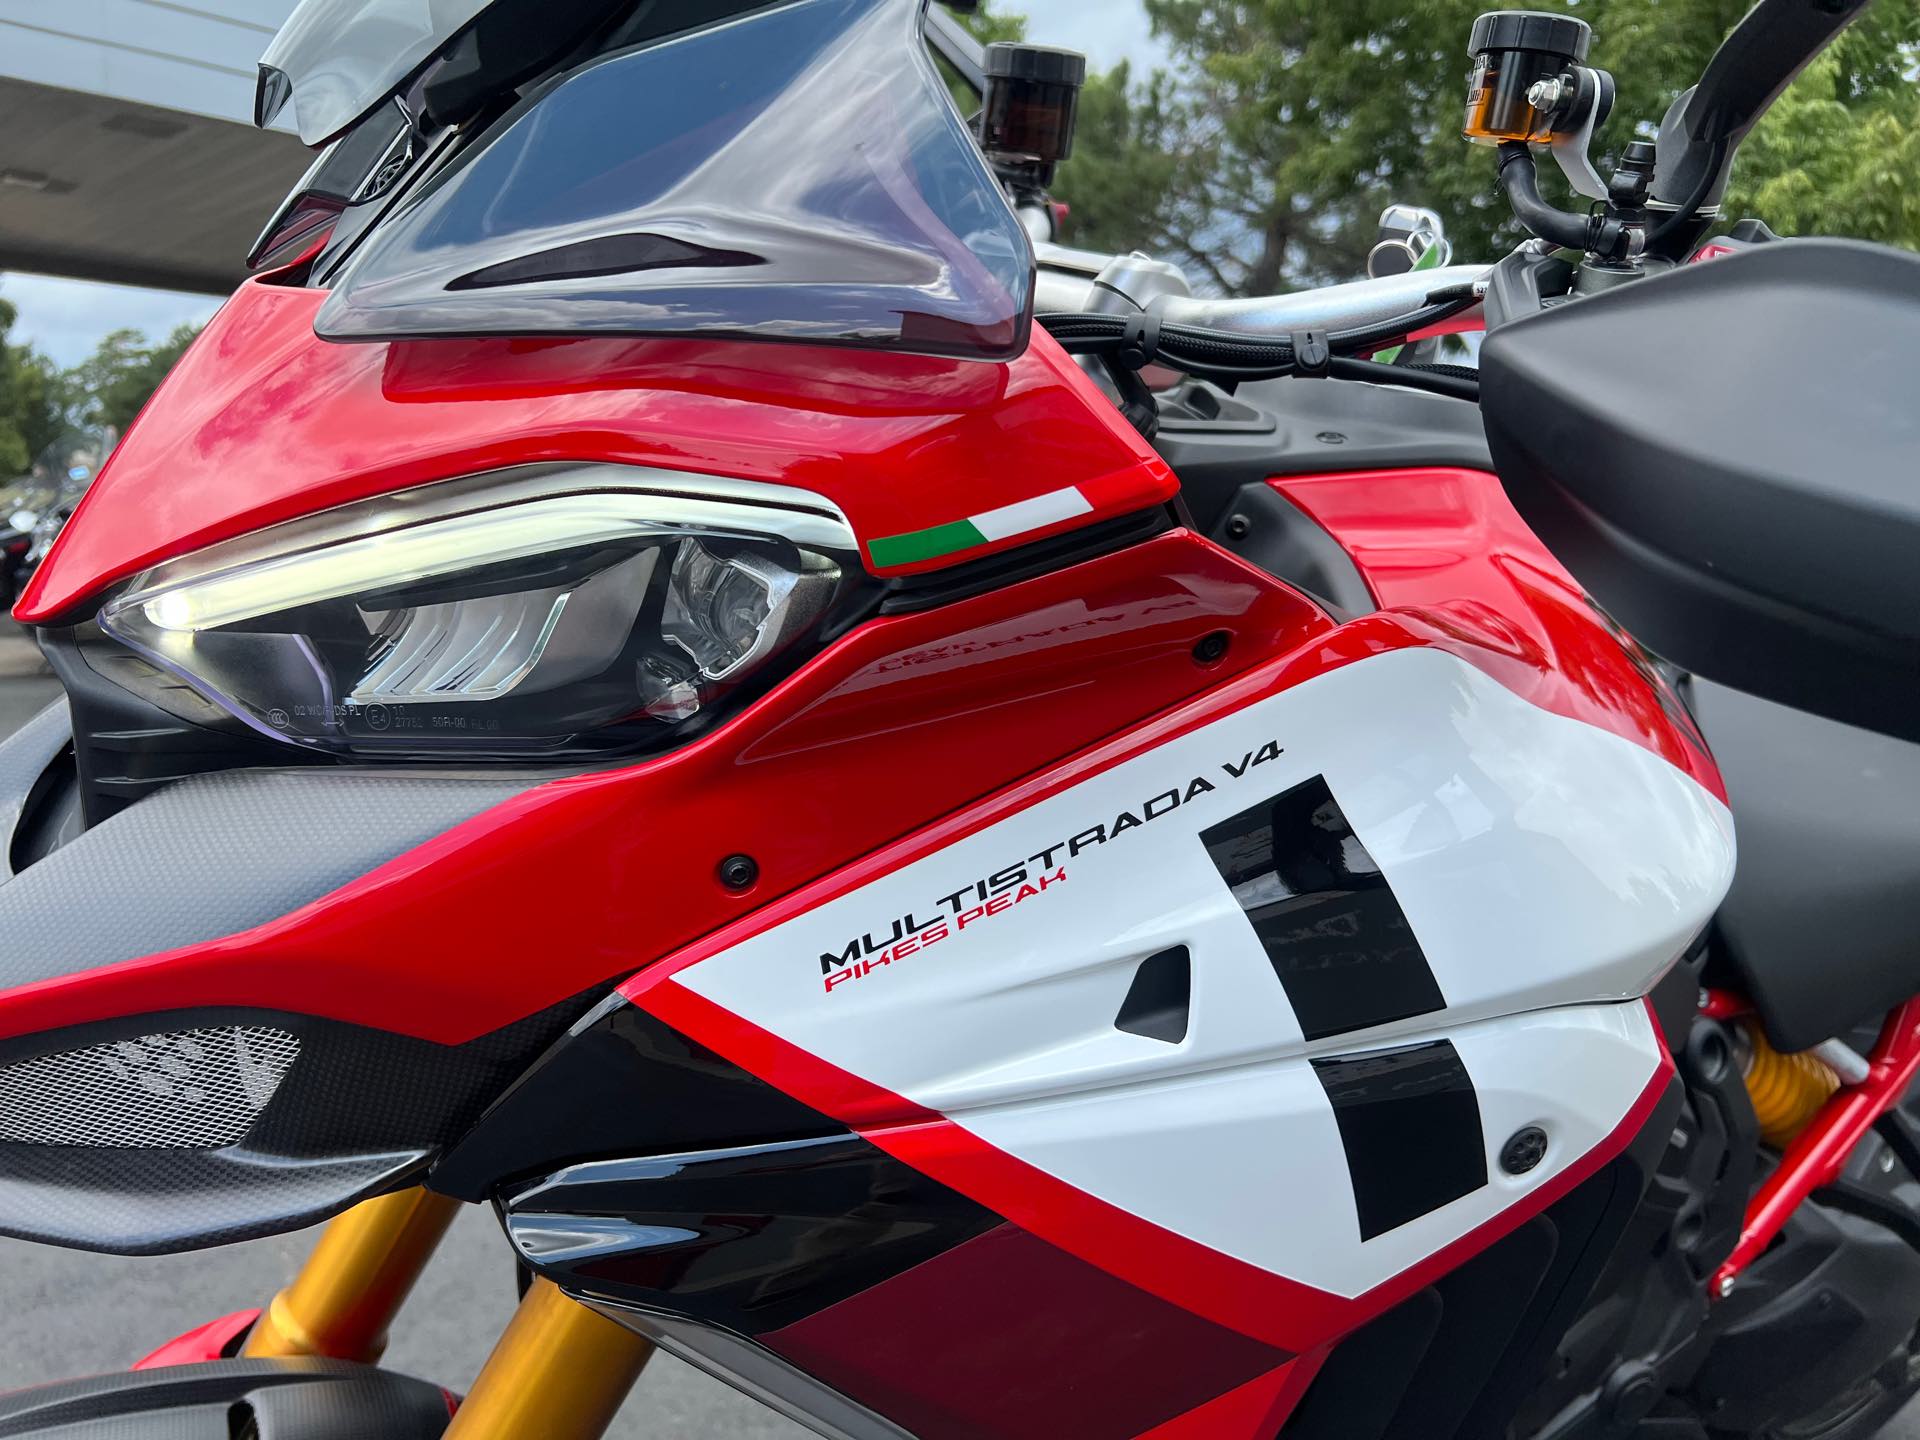 2023 Ducati Multistrada V4 Pikes Peak at Aces Motorcycles - Fort Collins